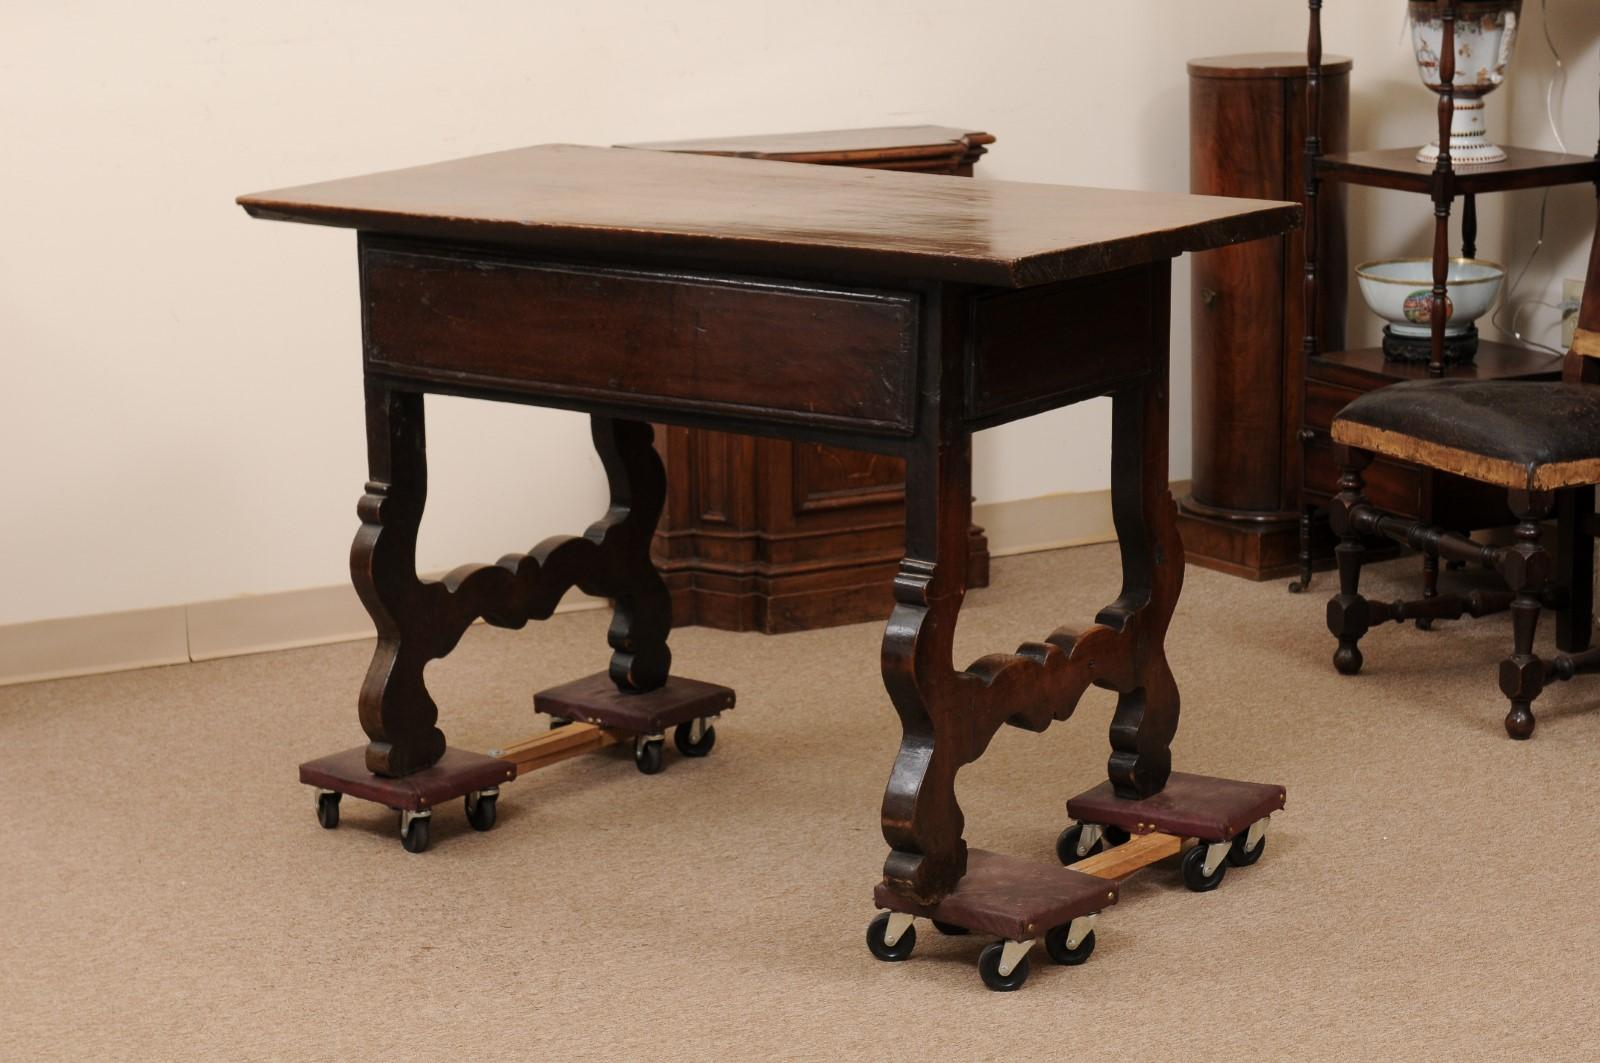 Spanish Walnut Console Table with 2 Drawers and Lyre Legs, Early 18th Century For Sale 6